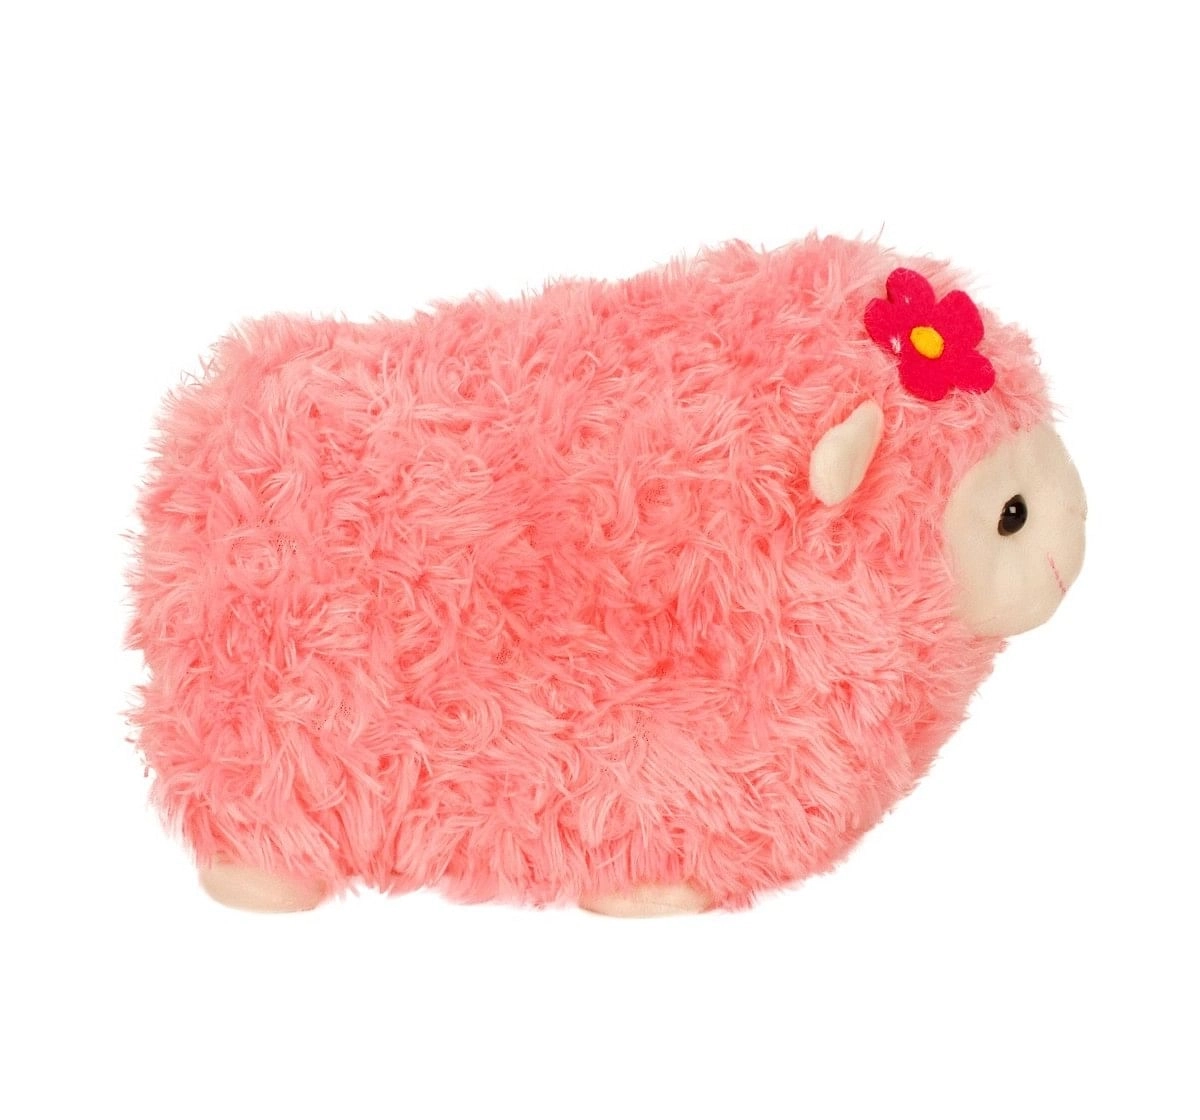 Fuzzbuzz Pink Lamb Stuffed Animal - 28Cm Quirky Soft Toys for Kids age 0M+ - 20 Cm (Pink)